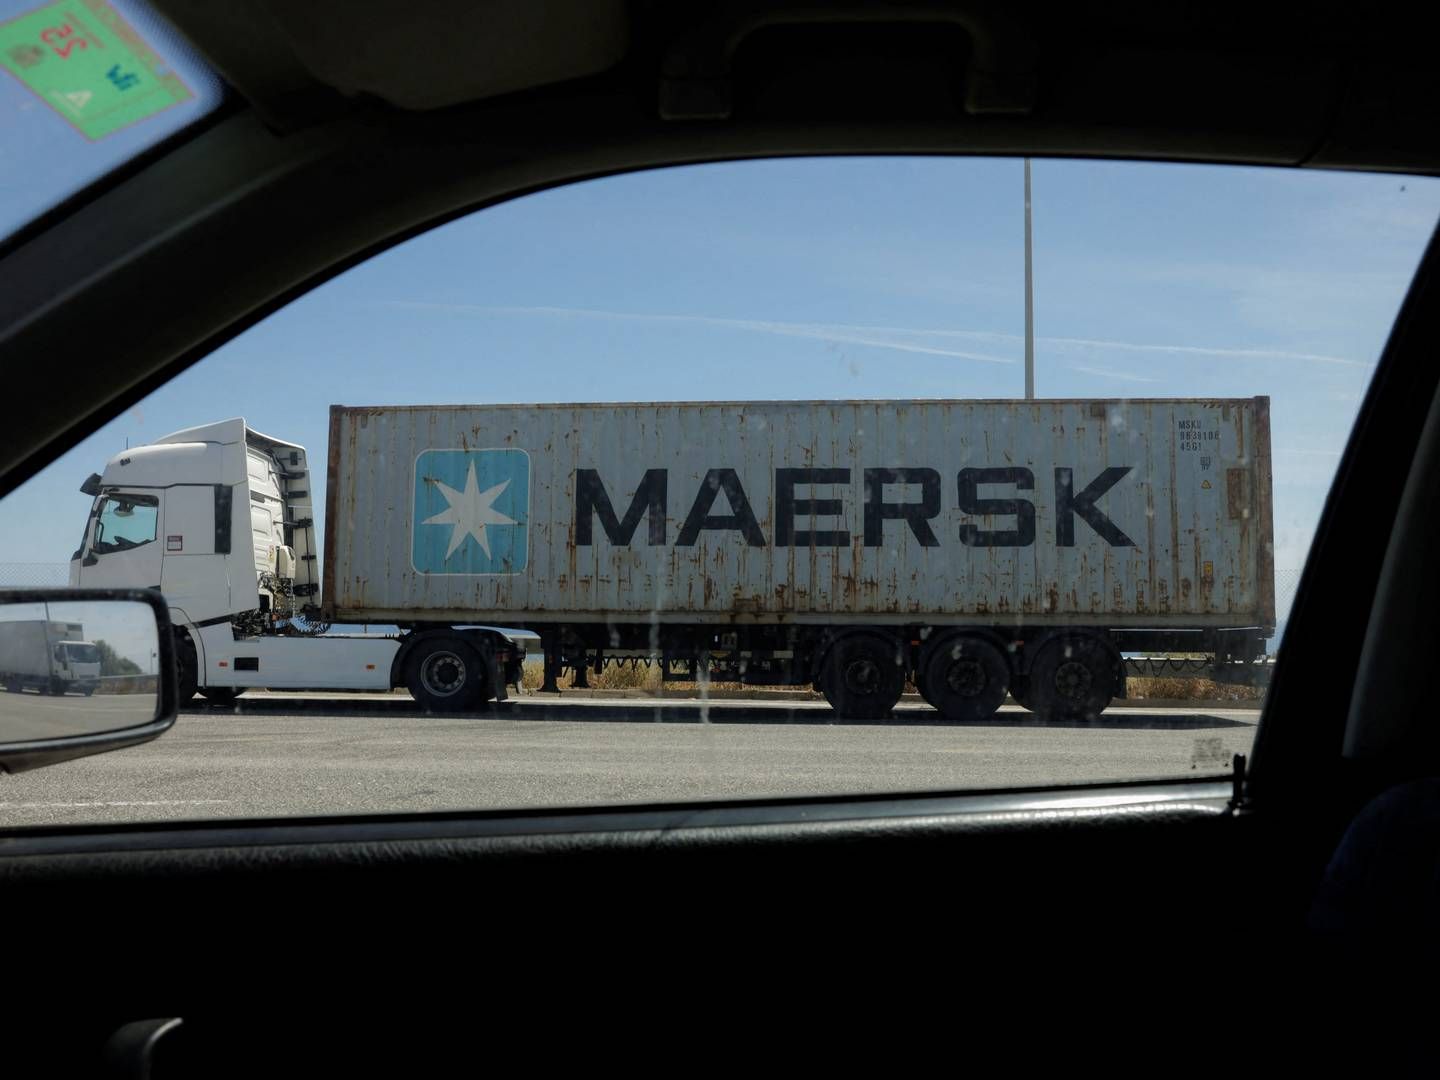 In 2016, Maersk decided to sell its oil business and instead become a pure transportation group that can handle freight all the way from the factory to the end user. As a result, the company now has a growing business on land. | Photo: Jon Nazca/Reuters/Ritzau Scanpix